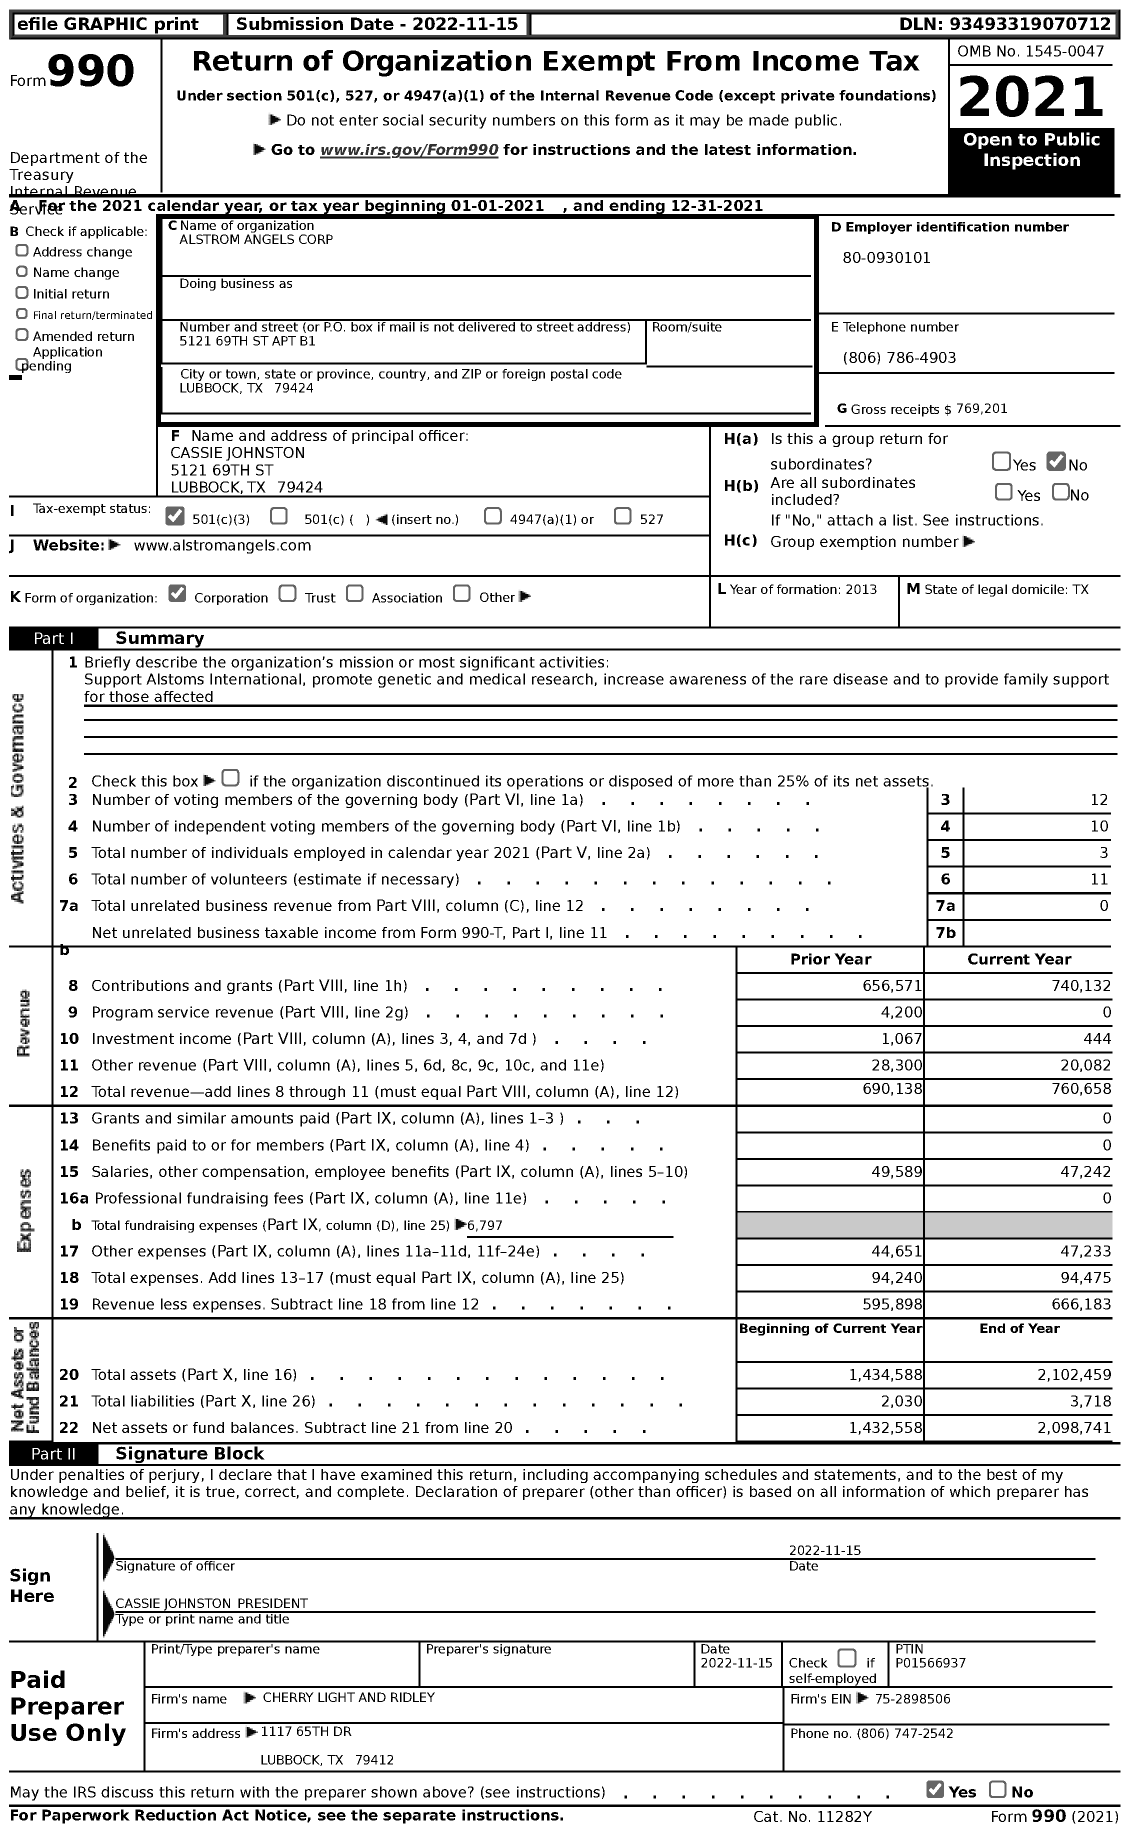 Image of first page of 2021 Form 990 for Alstrom Angels Corporation